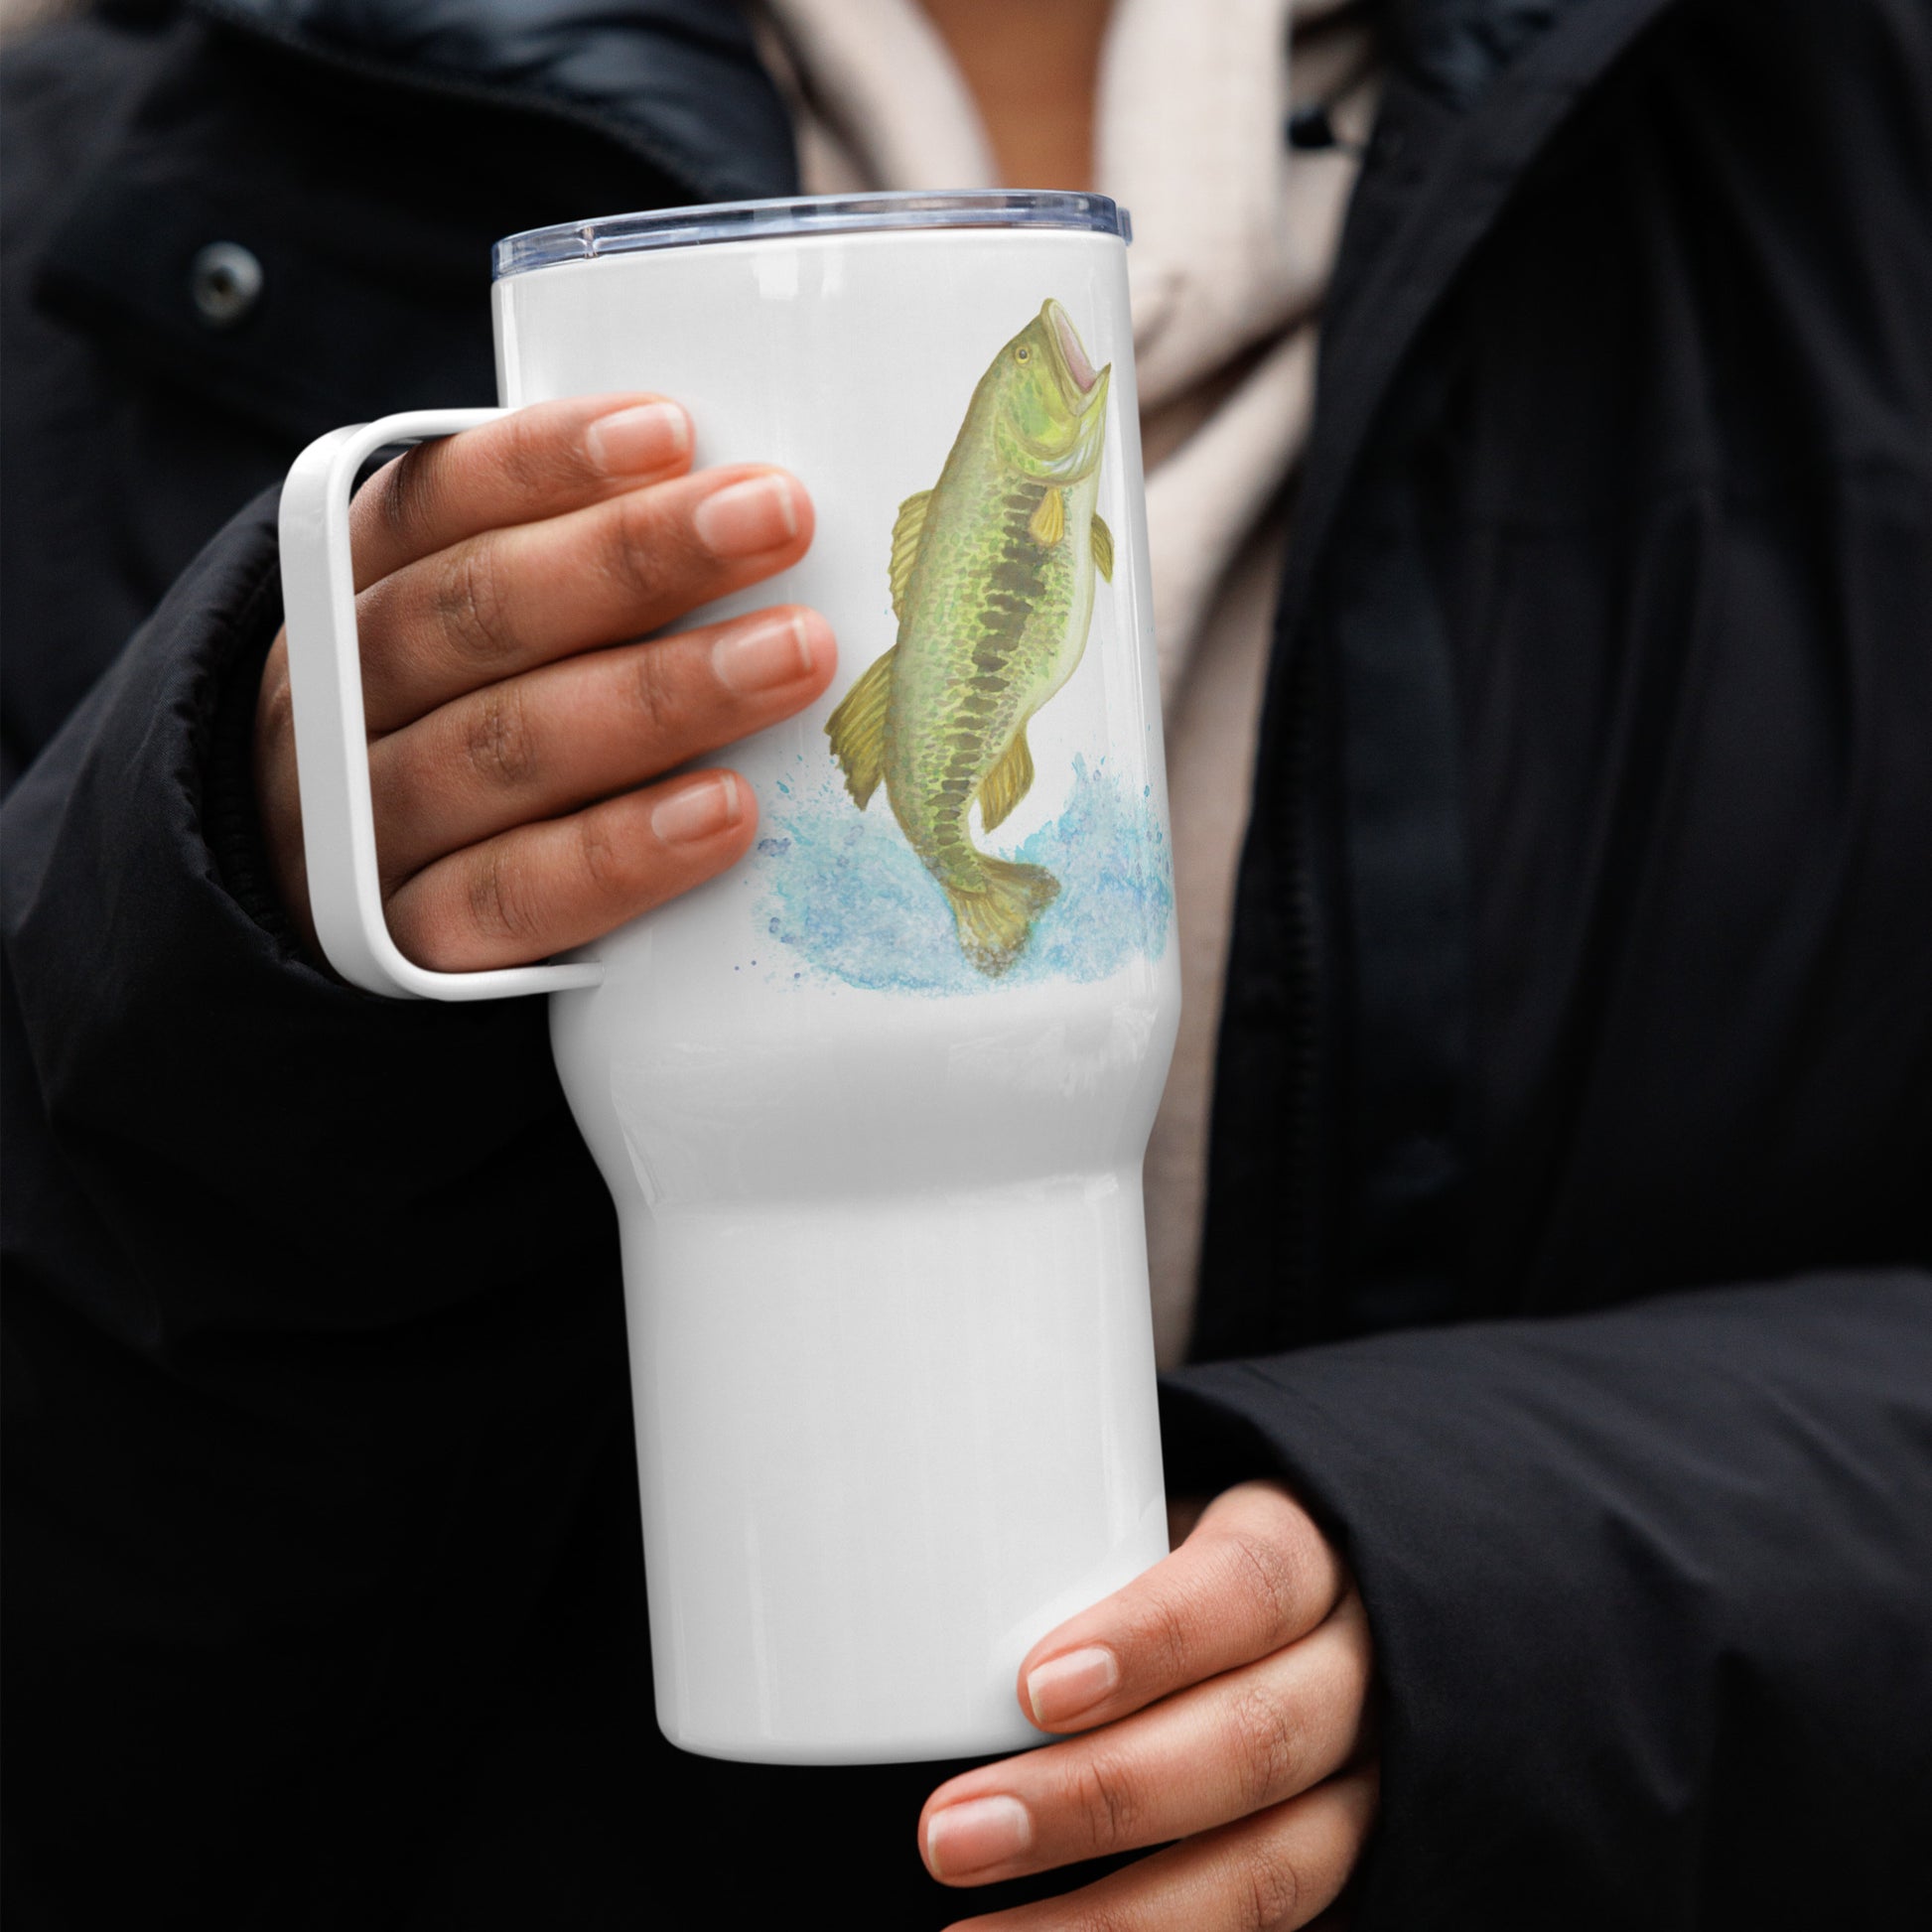 Stainless steel travel mug with handle. Holds 25 ounces of hot or cold drinks. Has print of watercolor bass fish on both sides. Fits most car cup holders. Comes with spill-proof BPA-free plastic lid. Mug shown on model's hands.